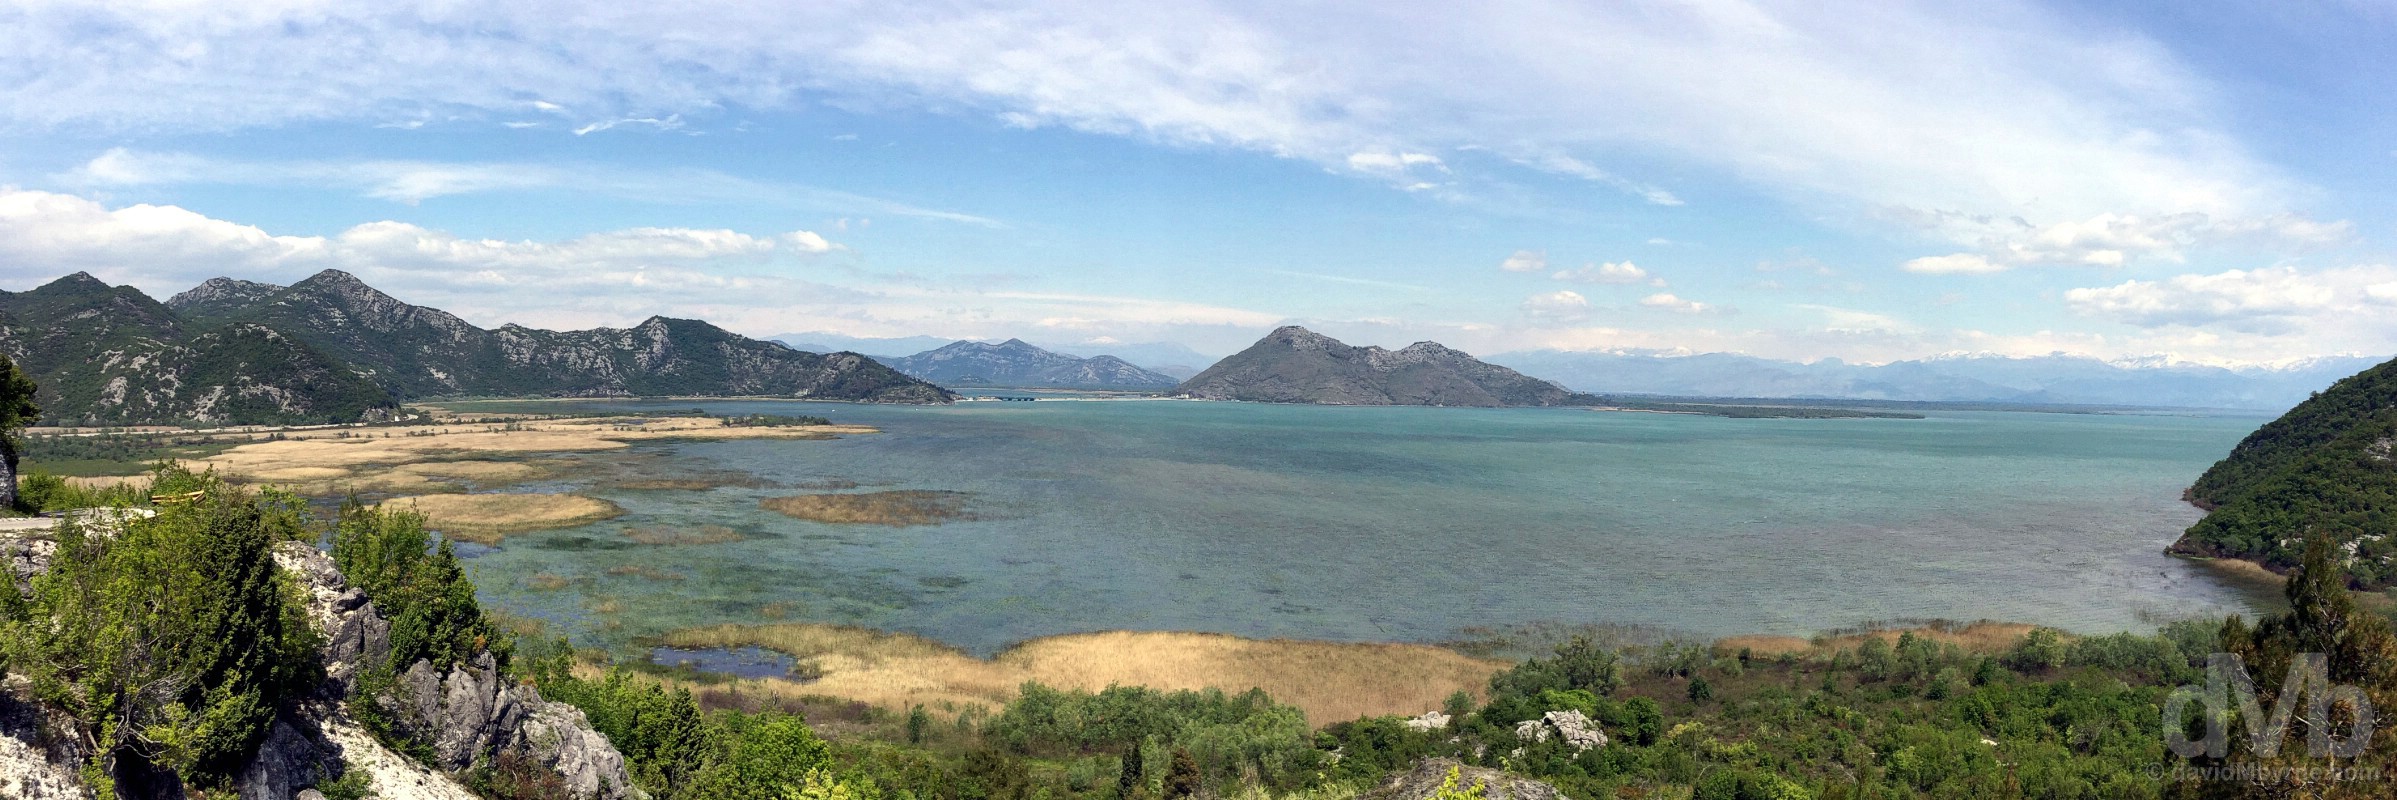 Lake Skadar National Park as seen from the outskirts of the village of Virpazar, Montenegro. April 21, 2017.